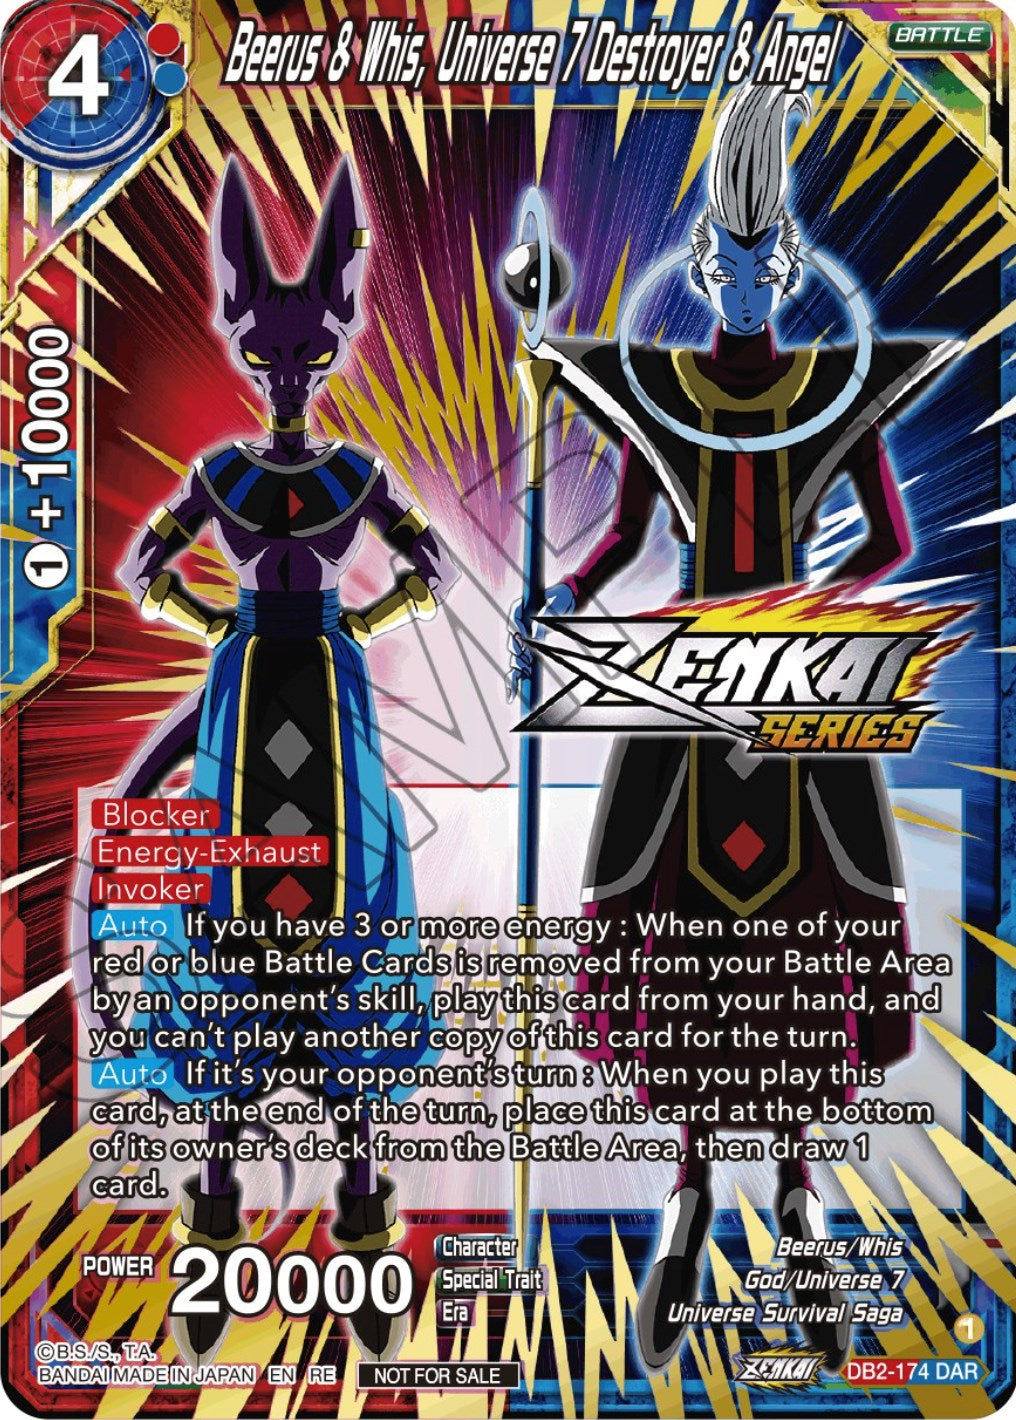 Beerus & Whis, Universe 7 Destroyer & Angel (Event Pack 12) (DB2-174) [Tournament Promotion Cards] | Amazing Games TCG